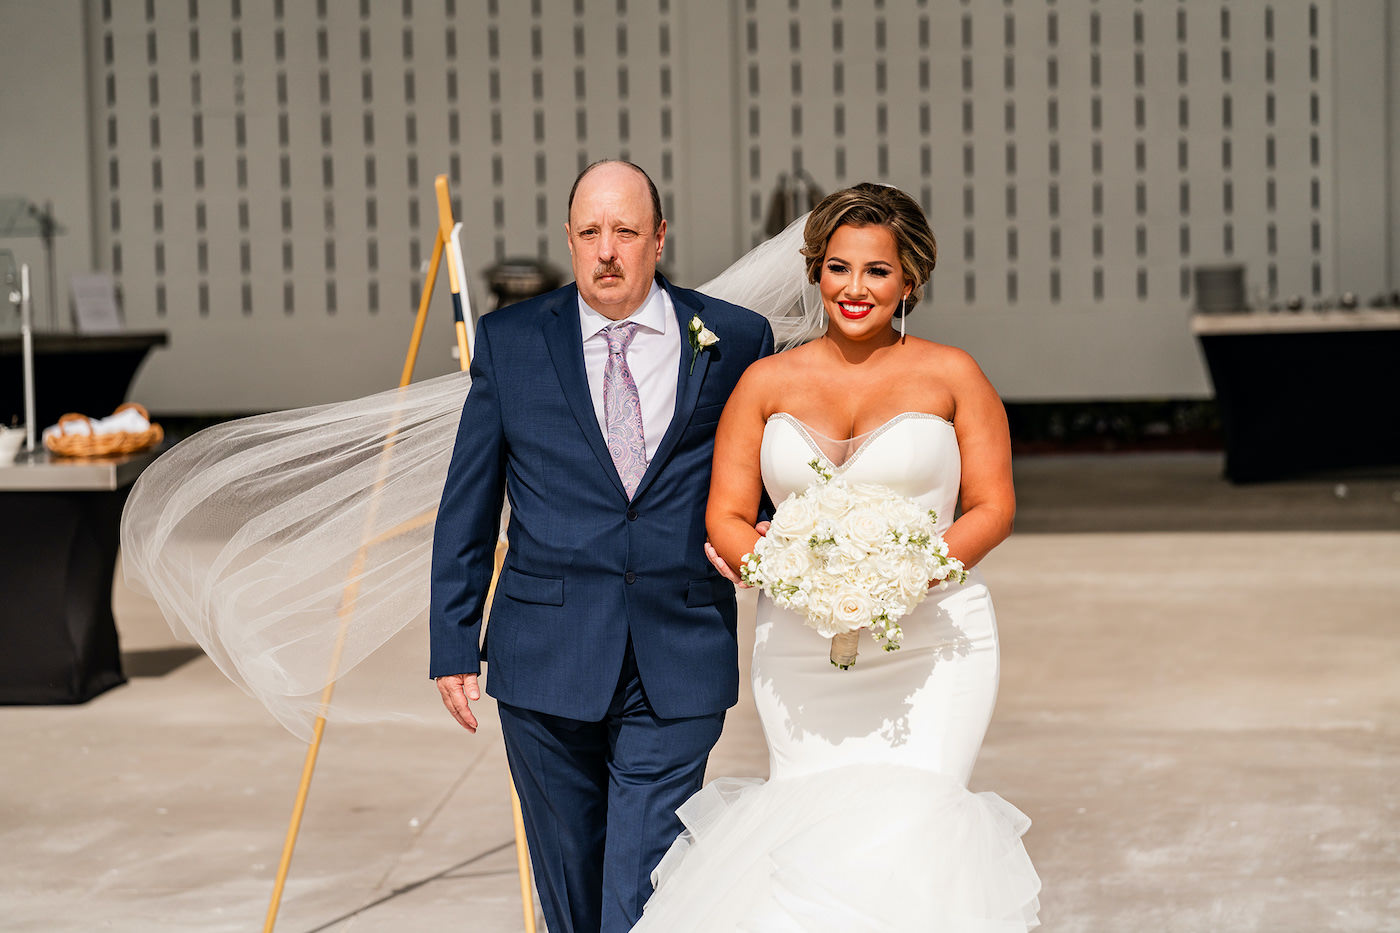 Romantic Clearwater Bride and Father Walk Down the Aisle in Outdoor Florida Wedding, Bride Wearing Romantic Fit and Flare White Dress, Holding Ivory Mixed Floral Bouquet with Roses and Greenery | Tampa Bay Hair and Makeup Artist Michele Renee The Studio